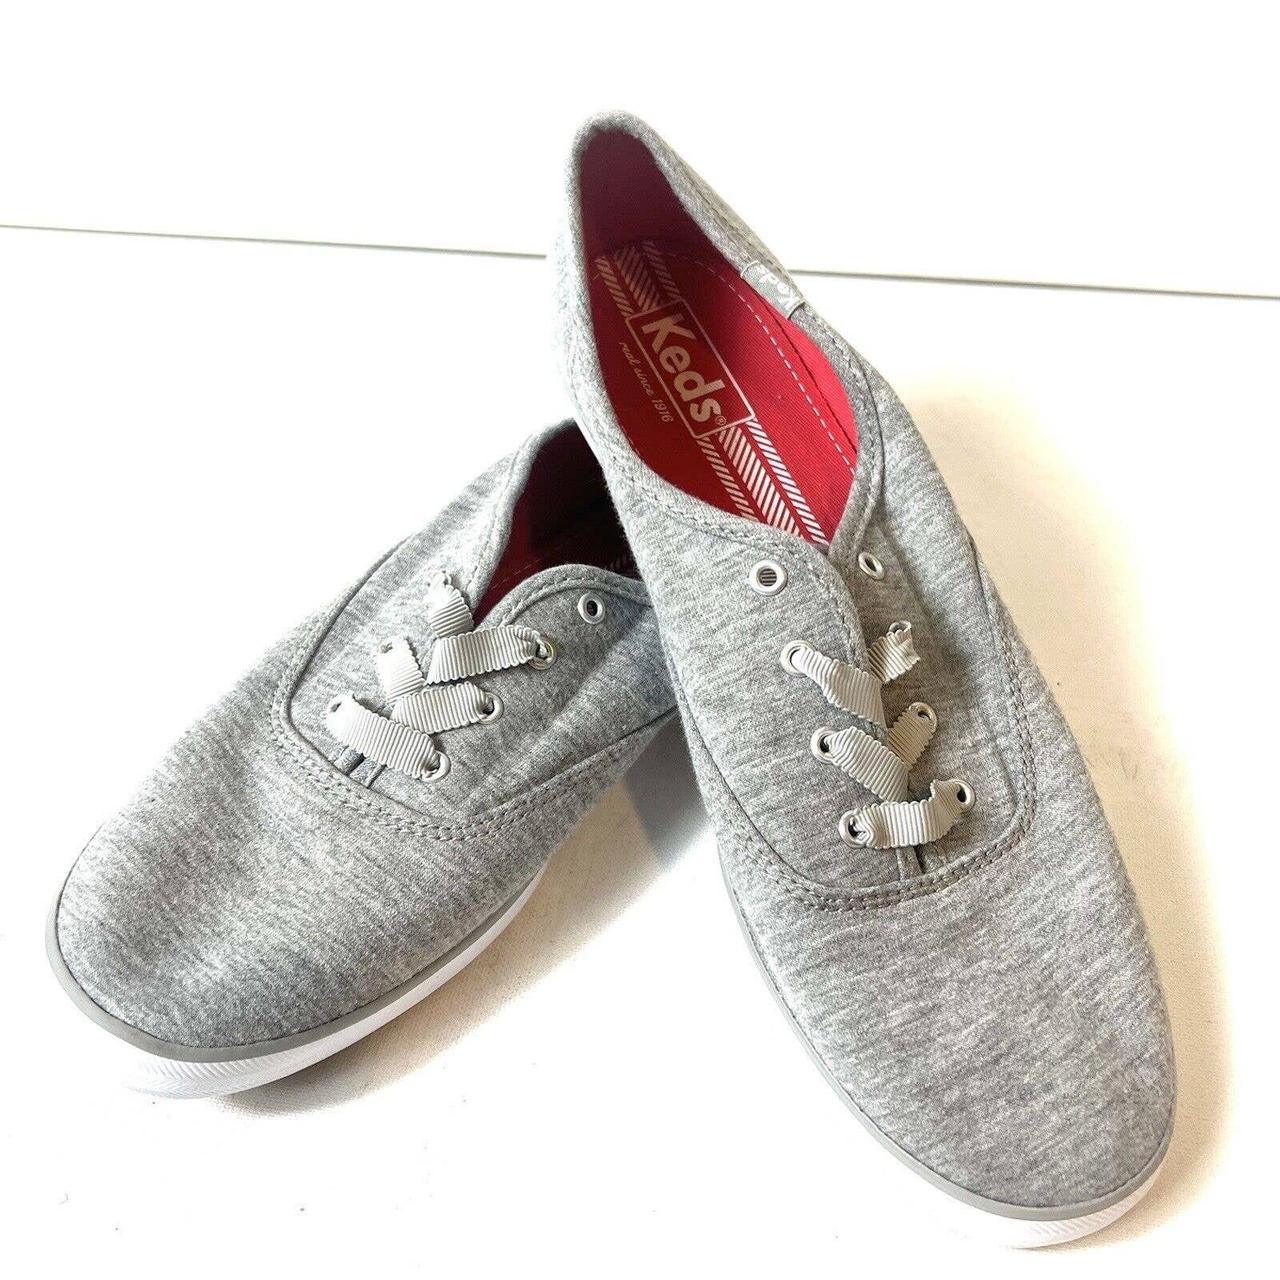 Product Image 1 - Keds Classic Women's Sneaker Shoes